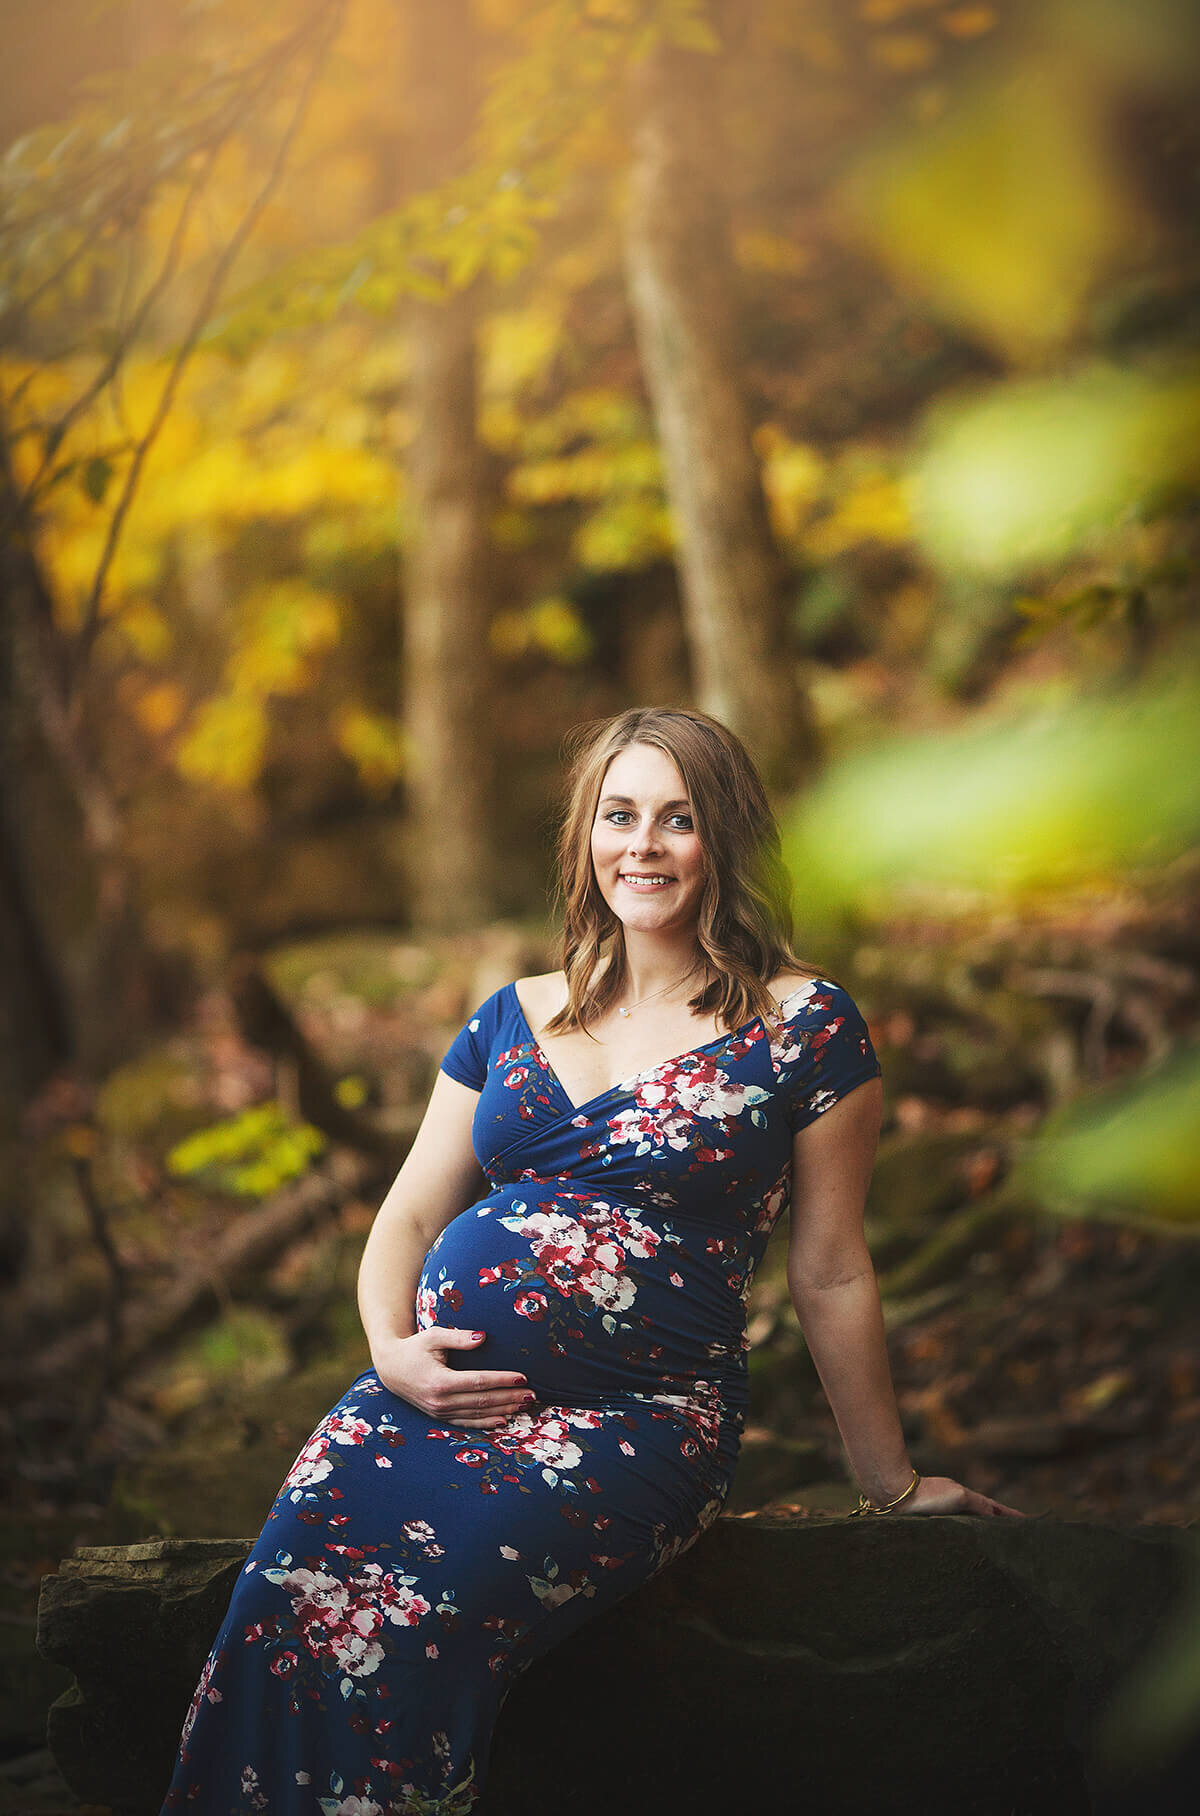 Pregnant women in blue dress with flowers on it, sitting on rock at Lowe Volk Park